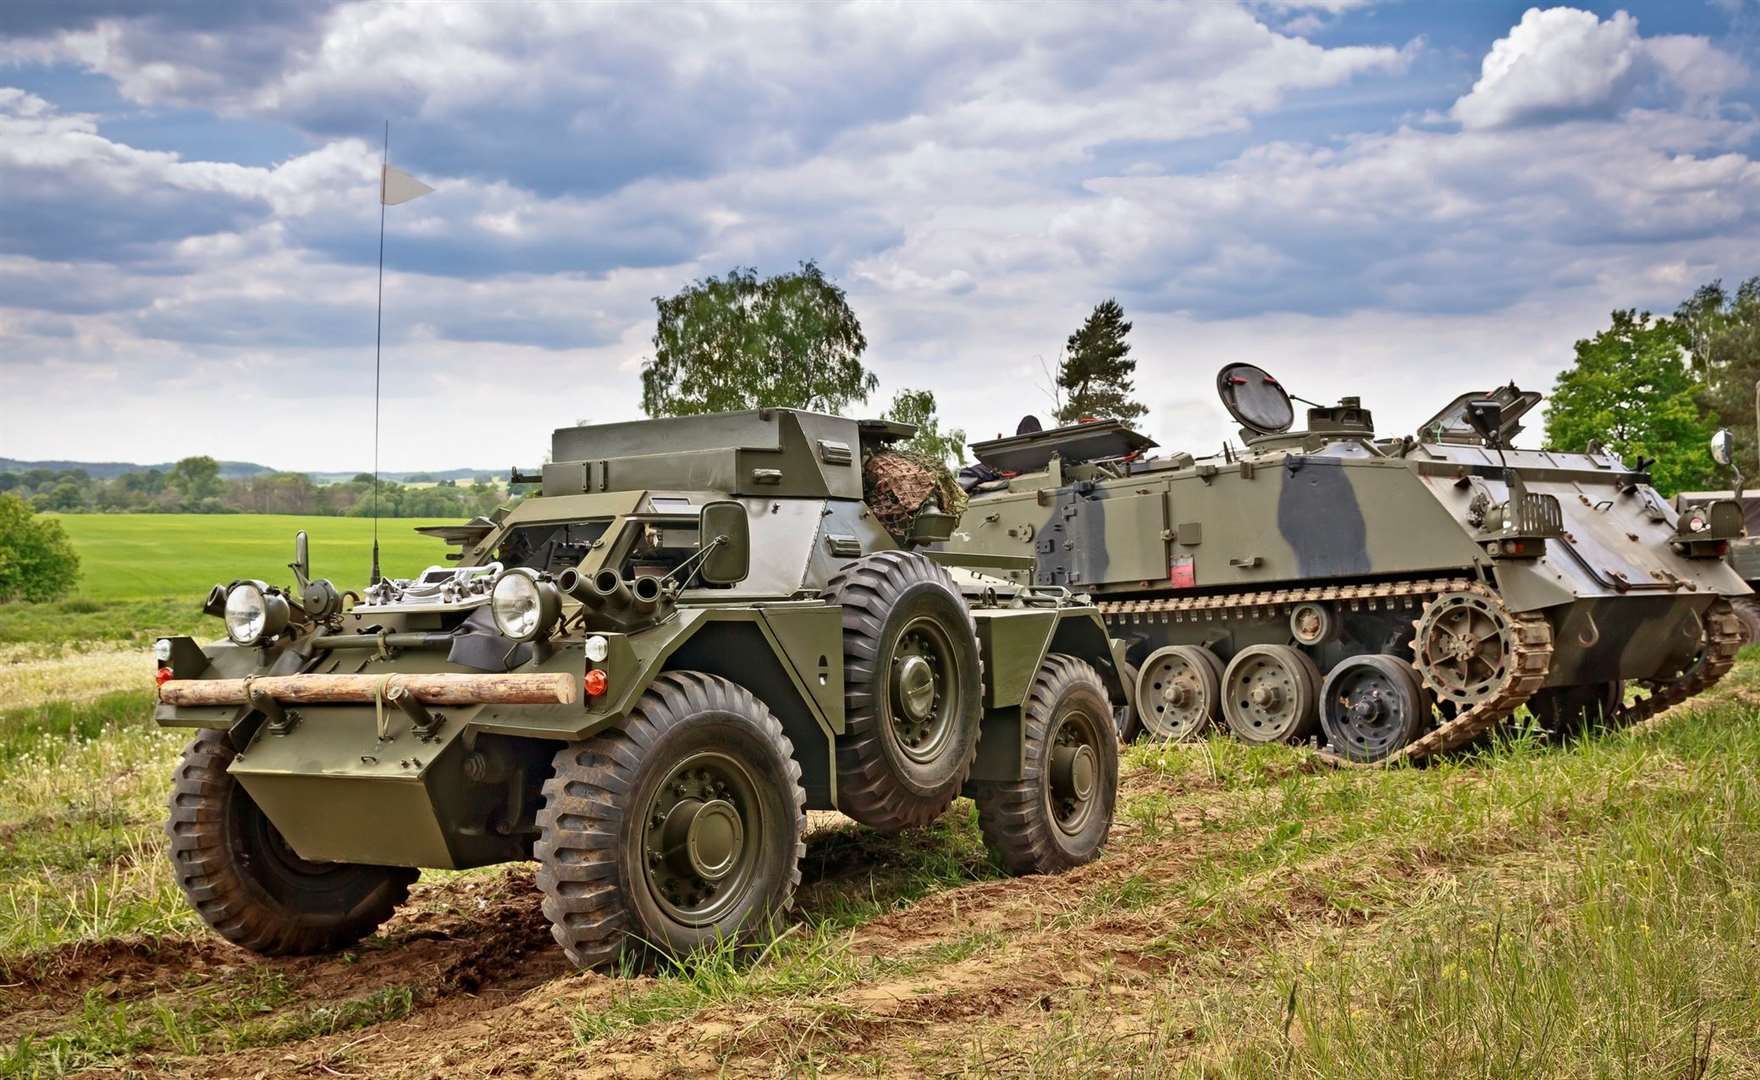 Take a ride in a wartime tank and admire vintage military vehicles. Picture: iStock